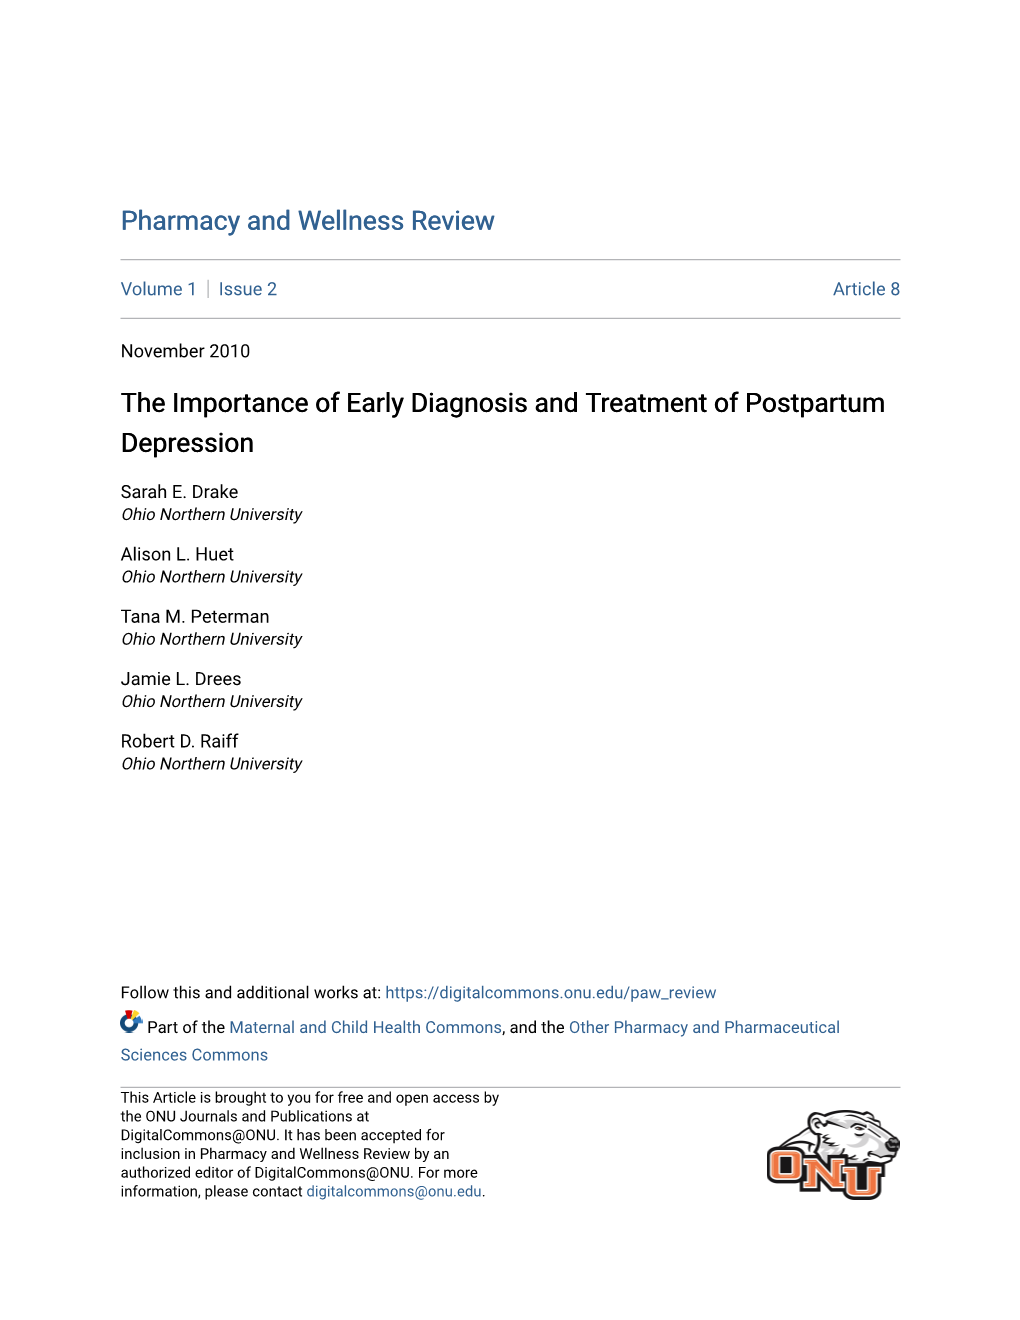 The Importance of Early Diagnosis and Treatment of Postpartum Depression